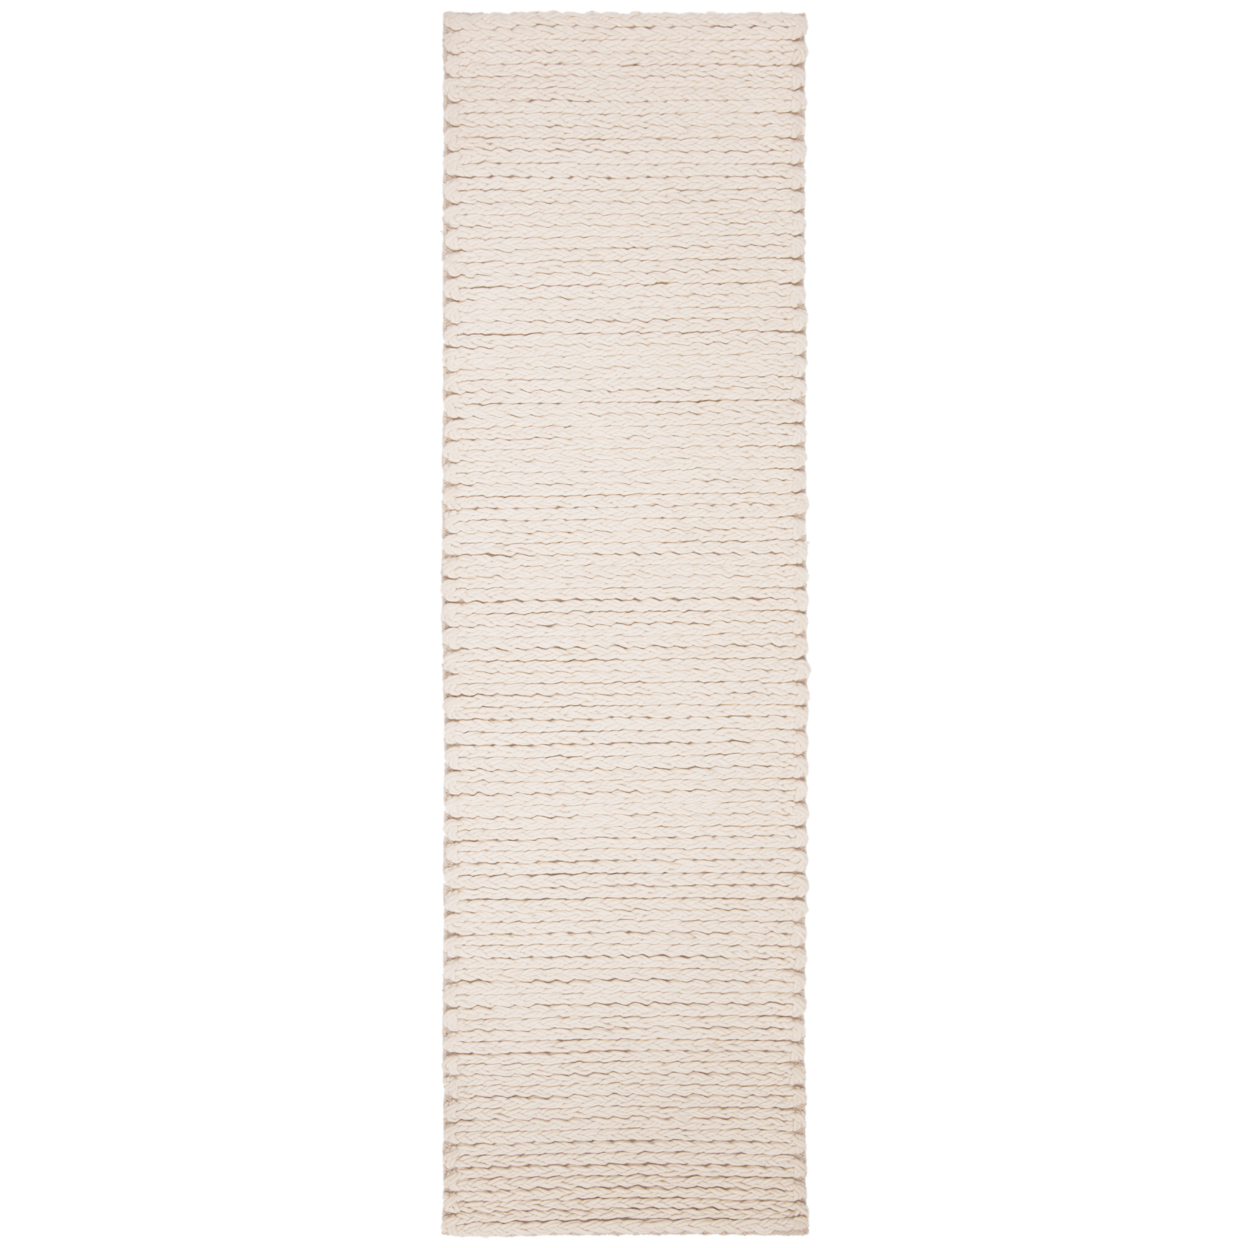 SAFAVIEH Natura Collection NAT802A Handwoven Ivory Rug - 5' X 8'